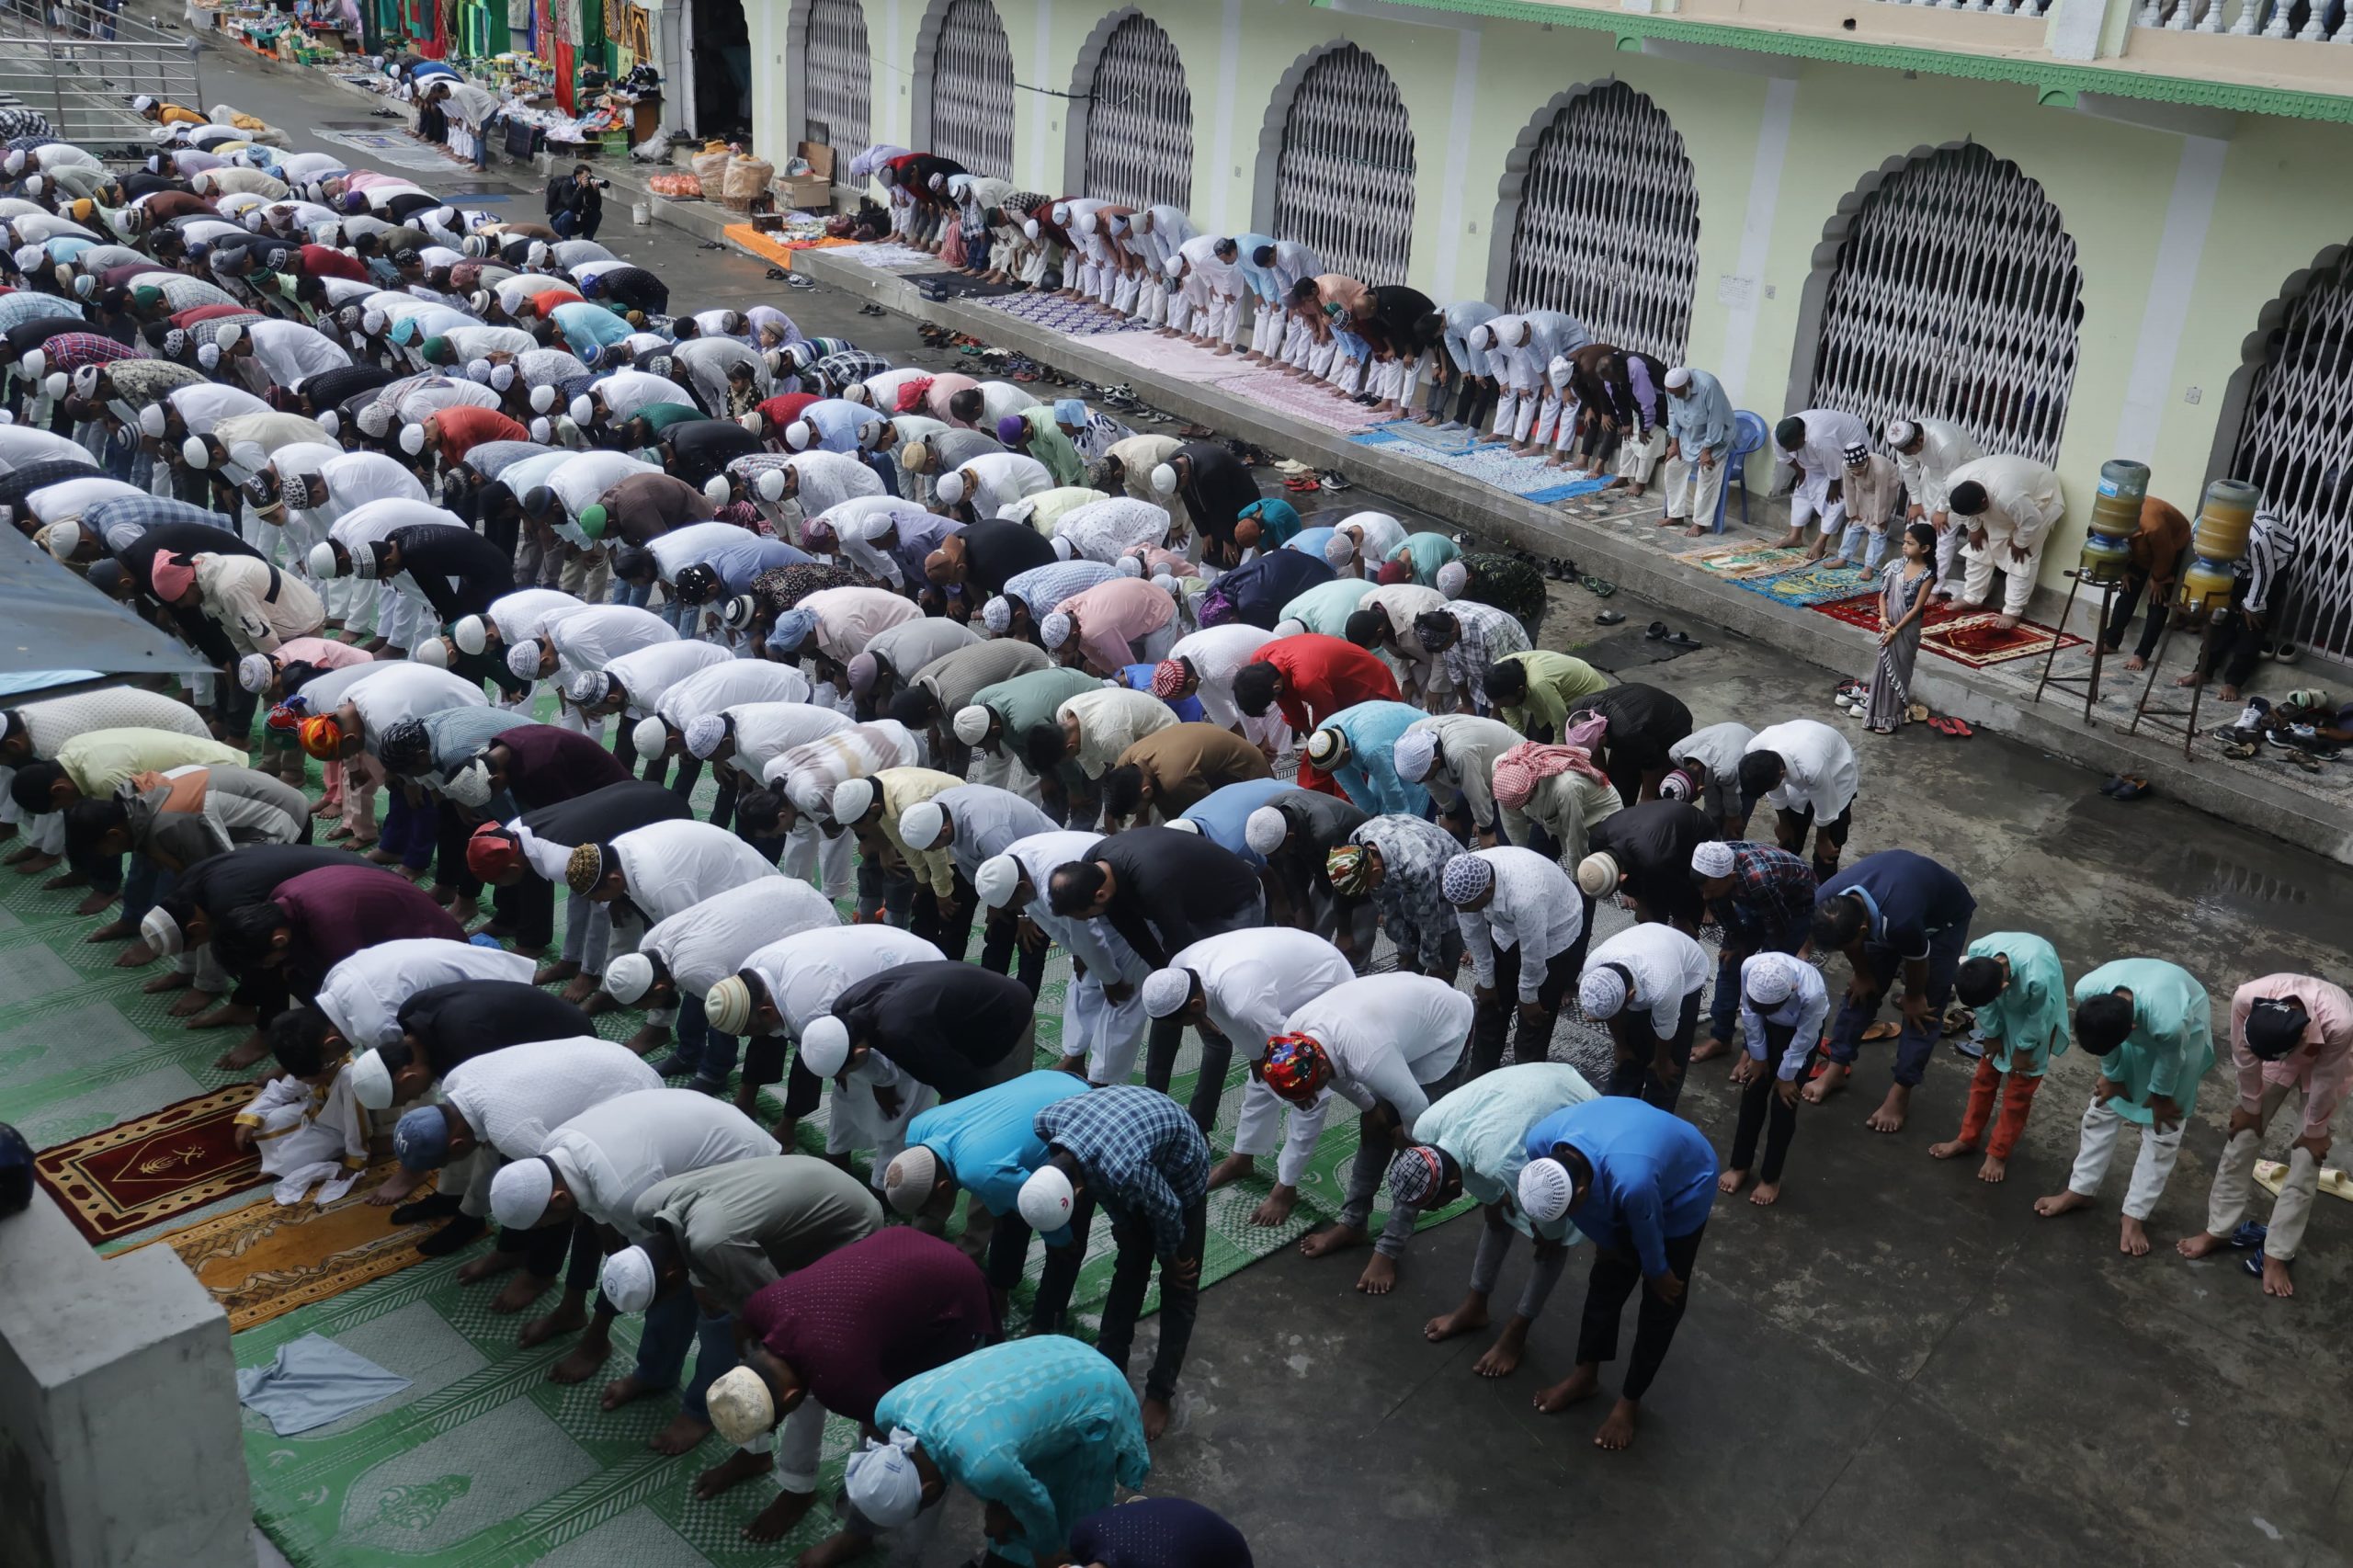 Bakr Eid celebrations across the country today (photos)